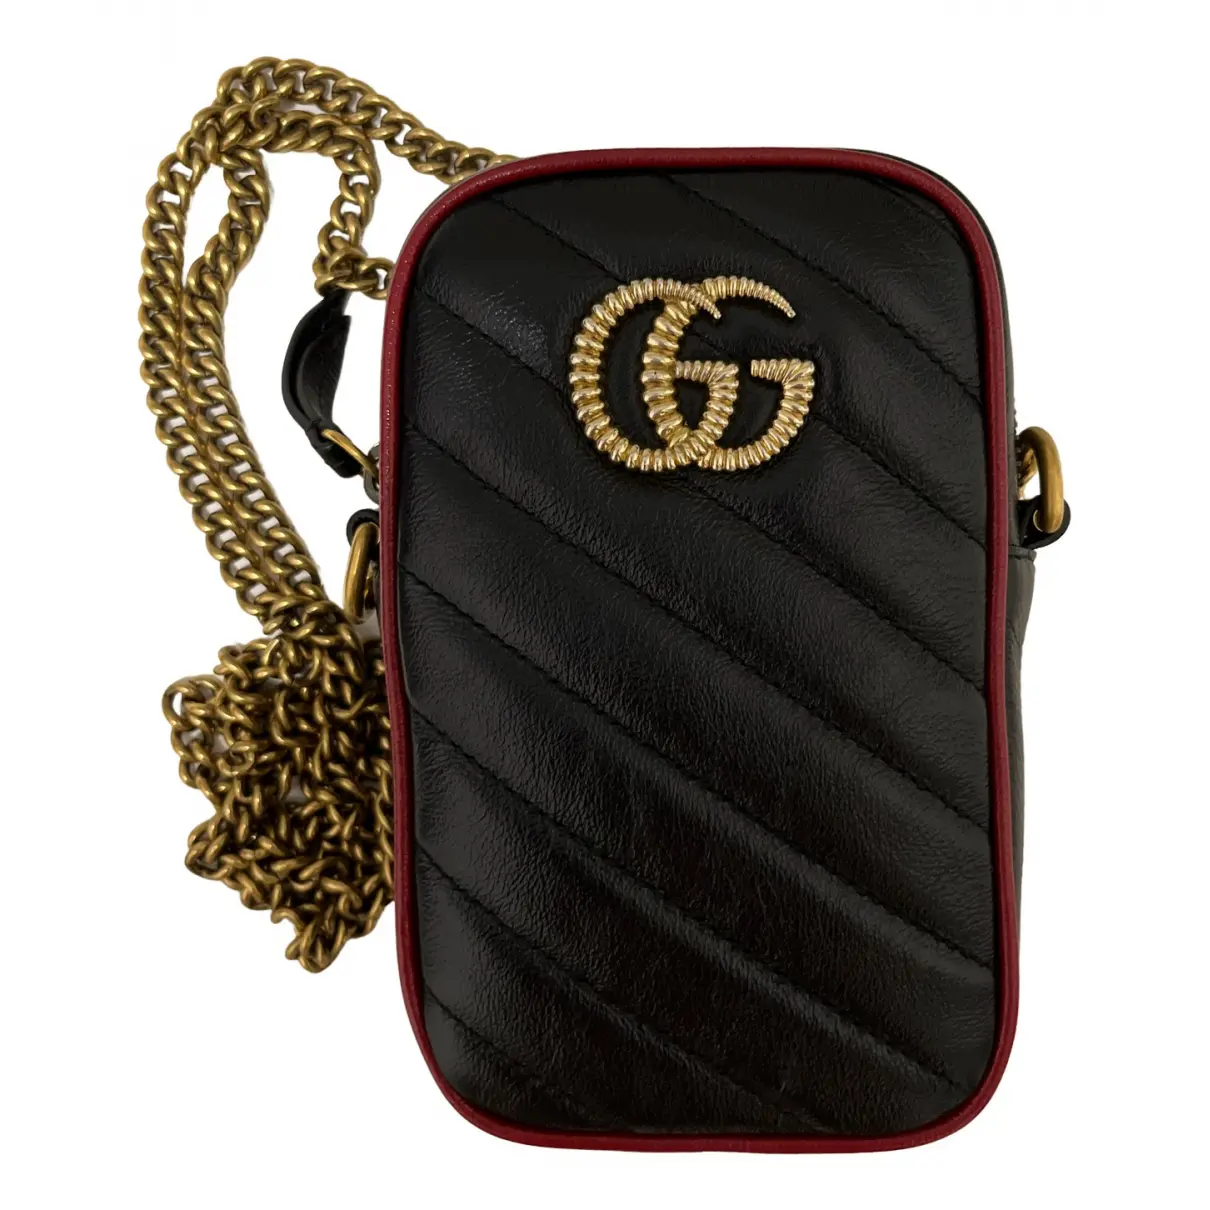 GG Marmont Phone leather crossbody bag Gucci